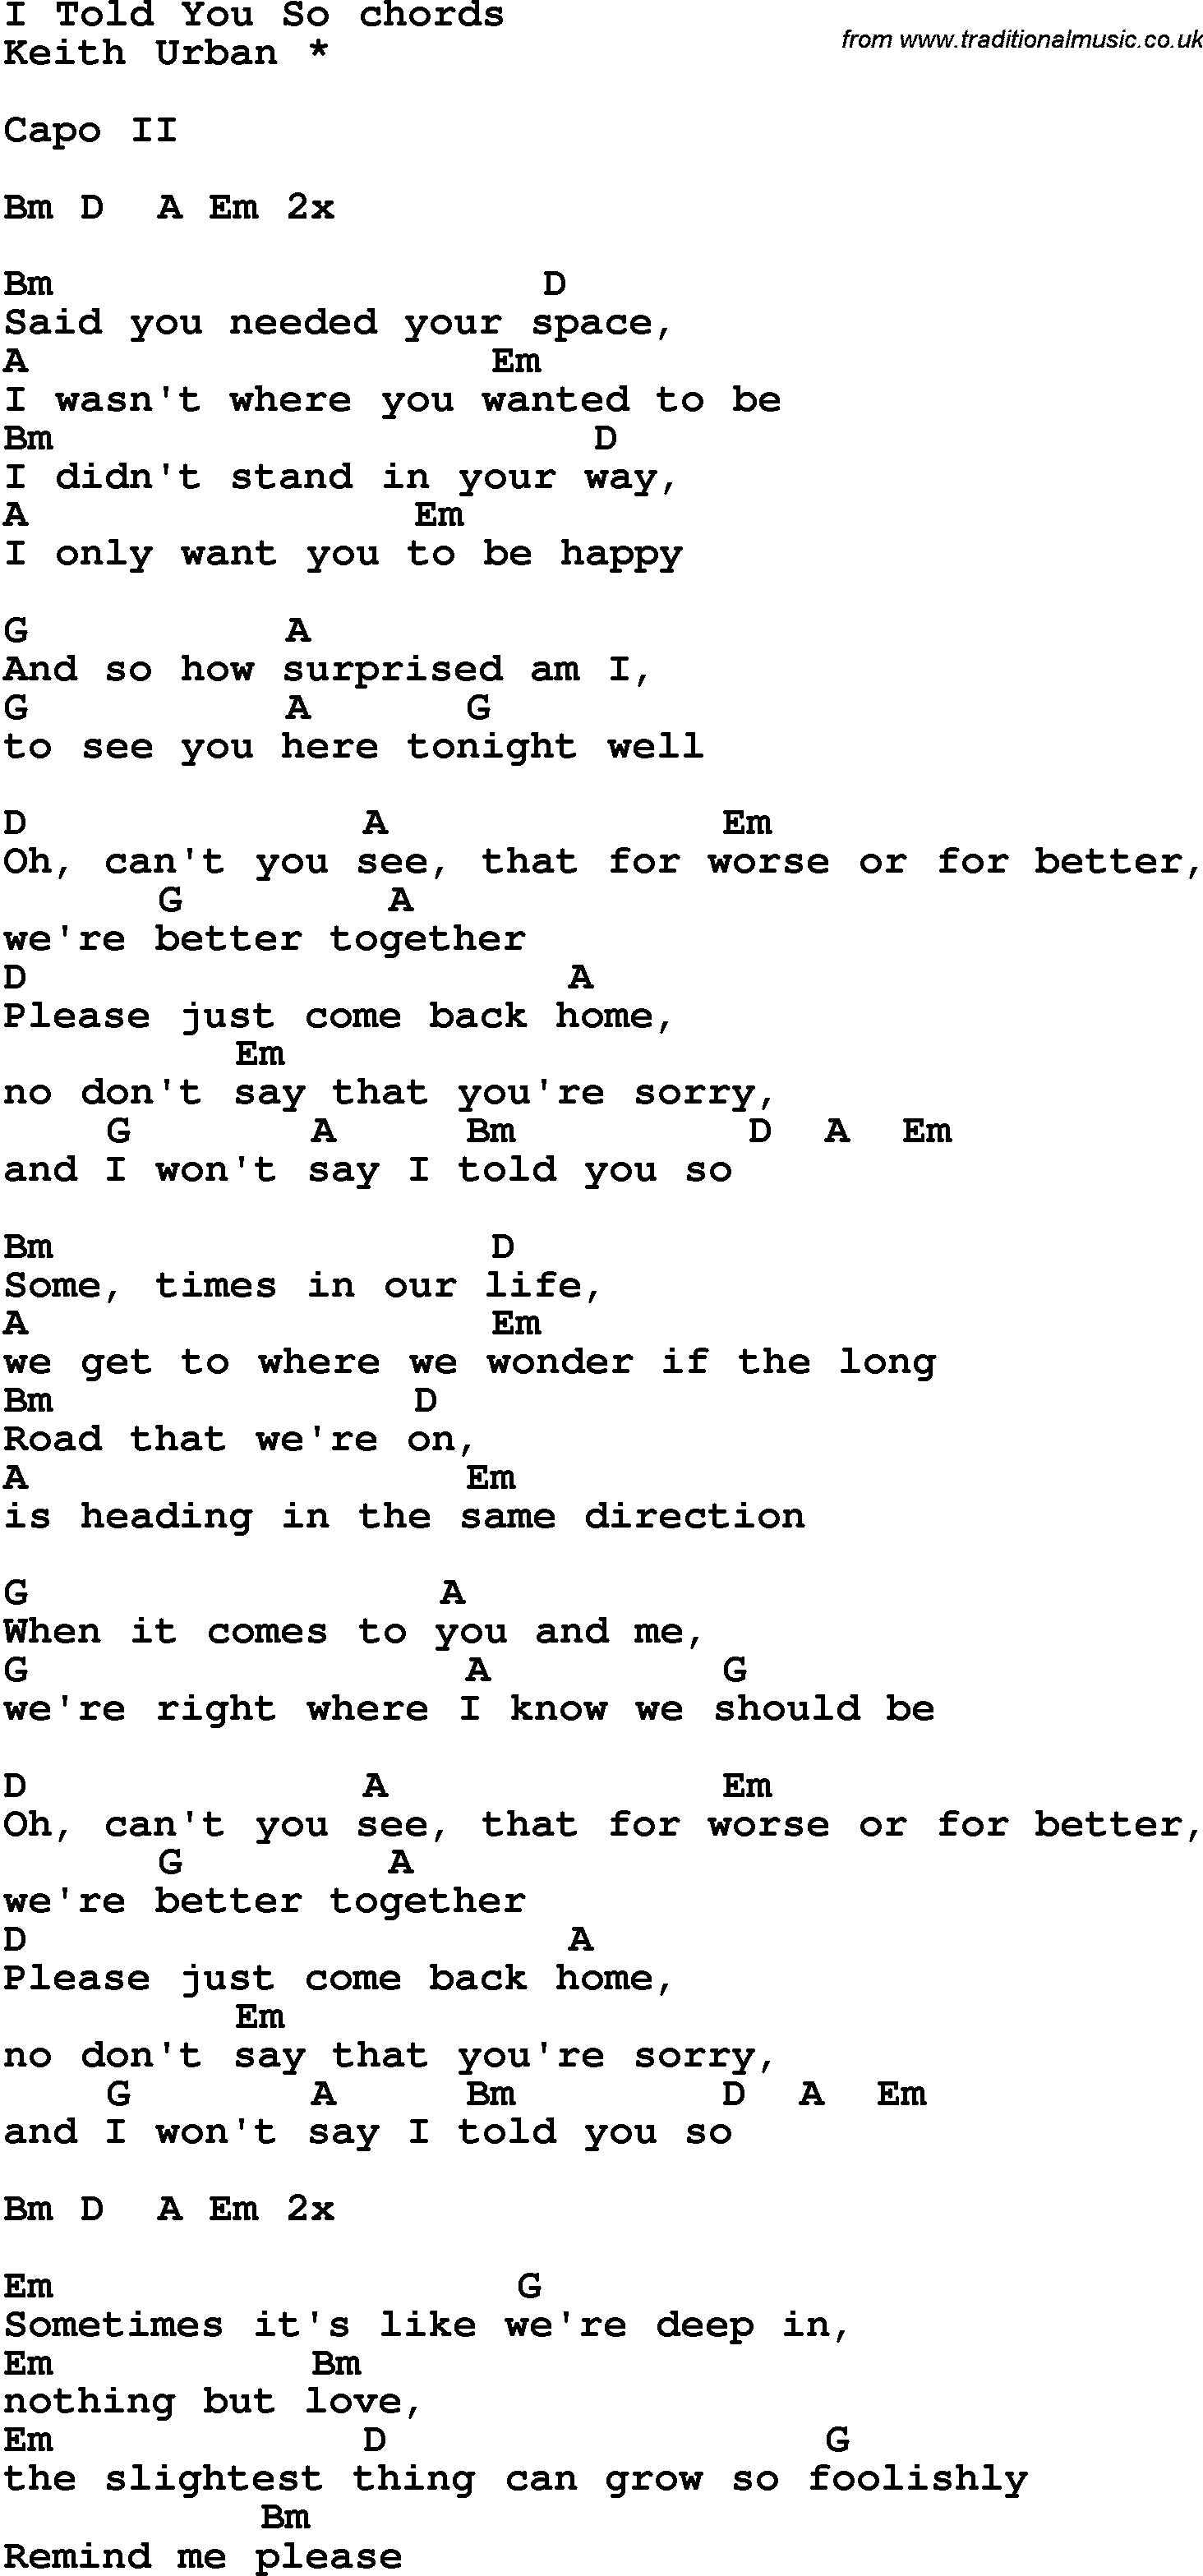 Song Lyrics with guitar chords for I Told You So